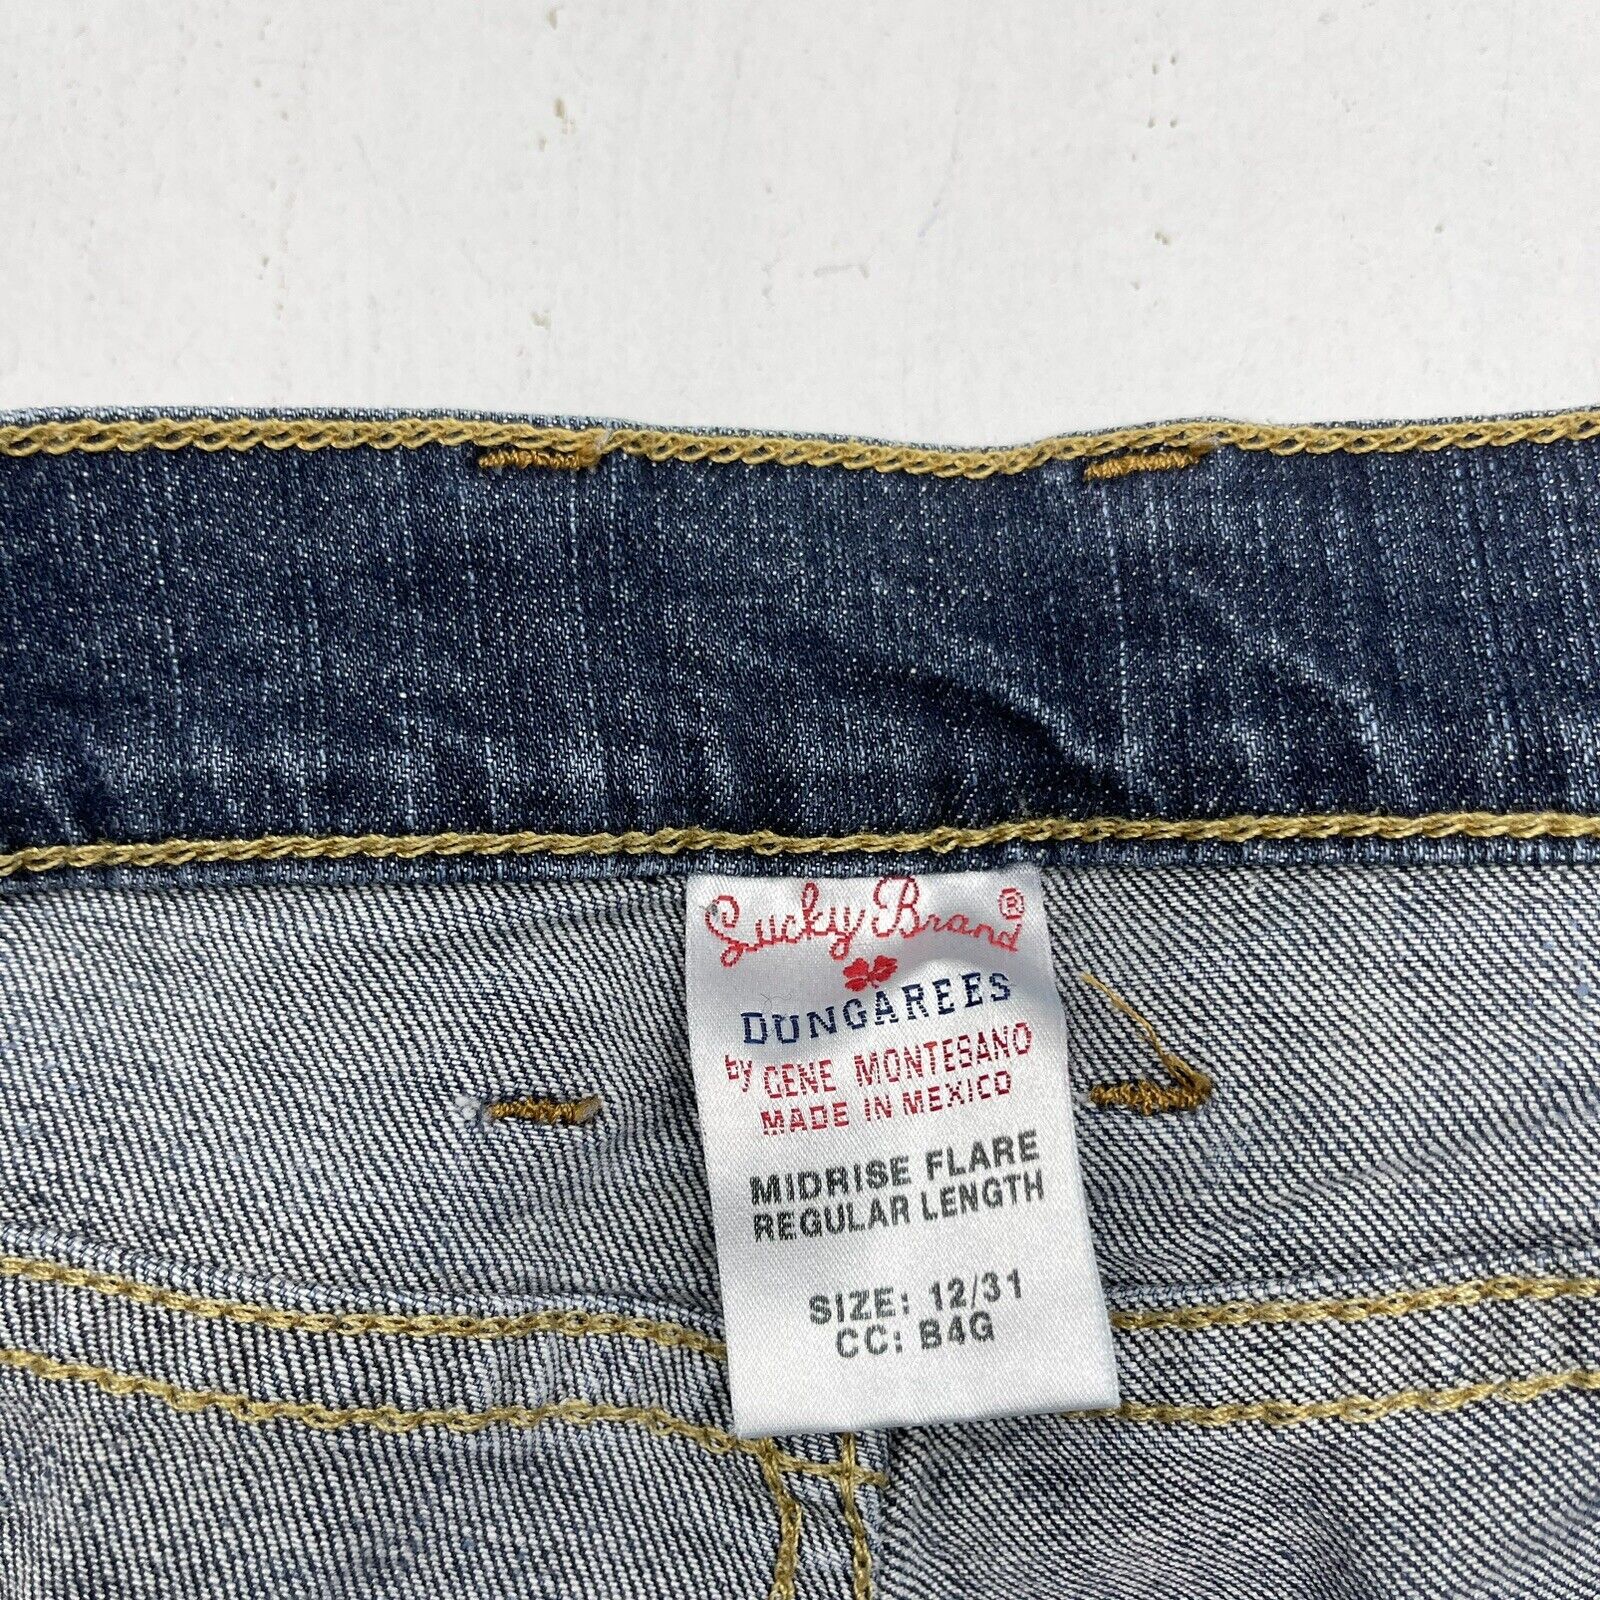 Vintage Lucky Jeans, Lucky Brand Jeans, Lucky Dungarees, Women's